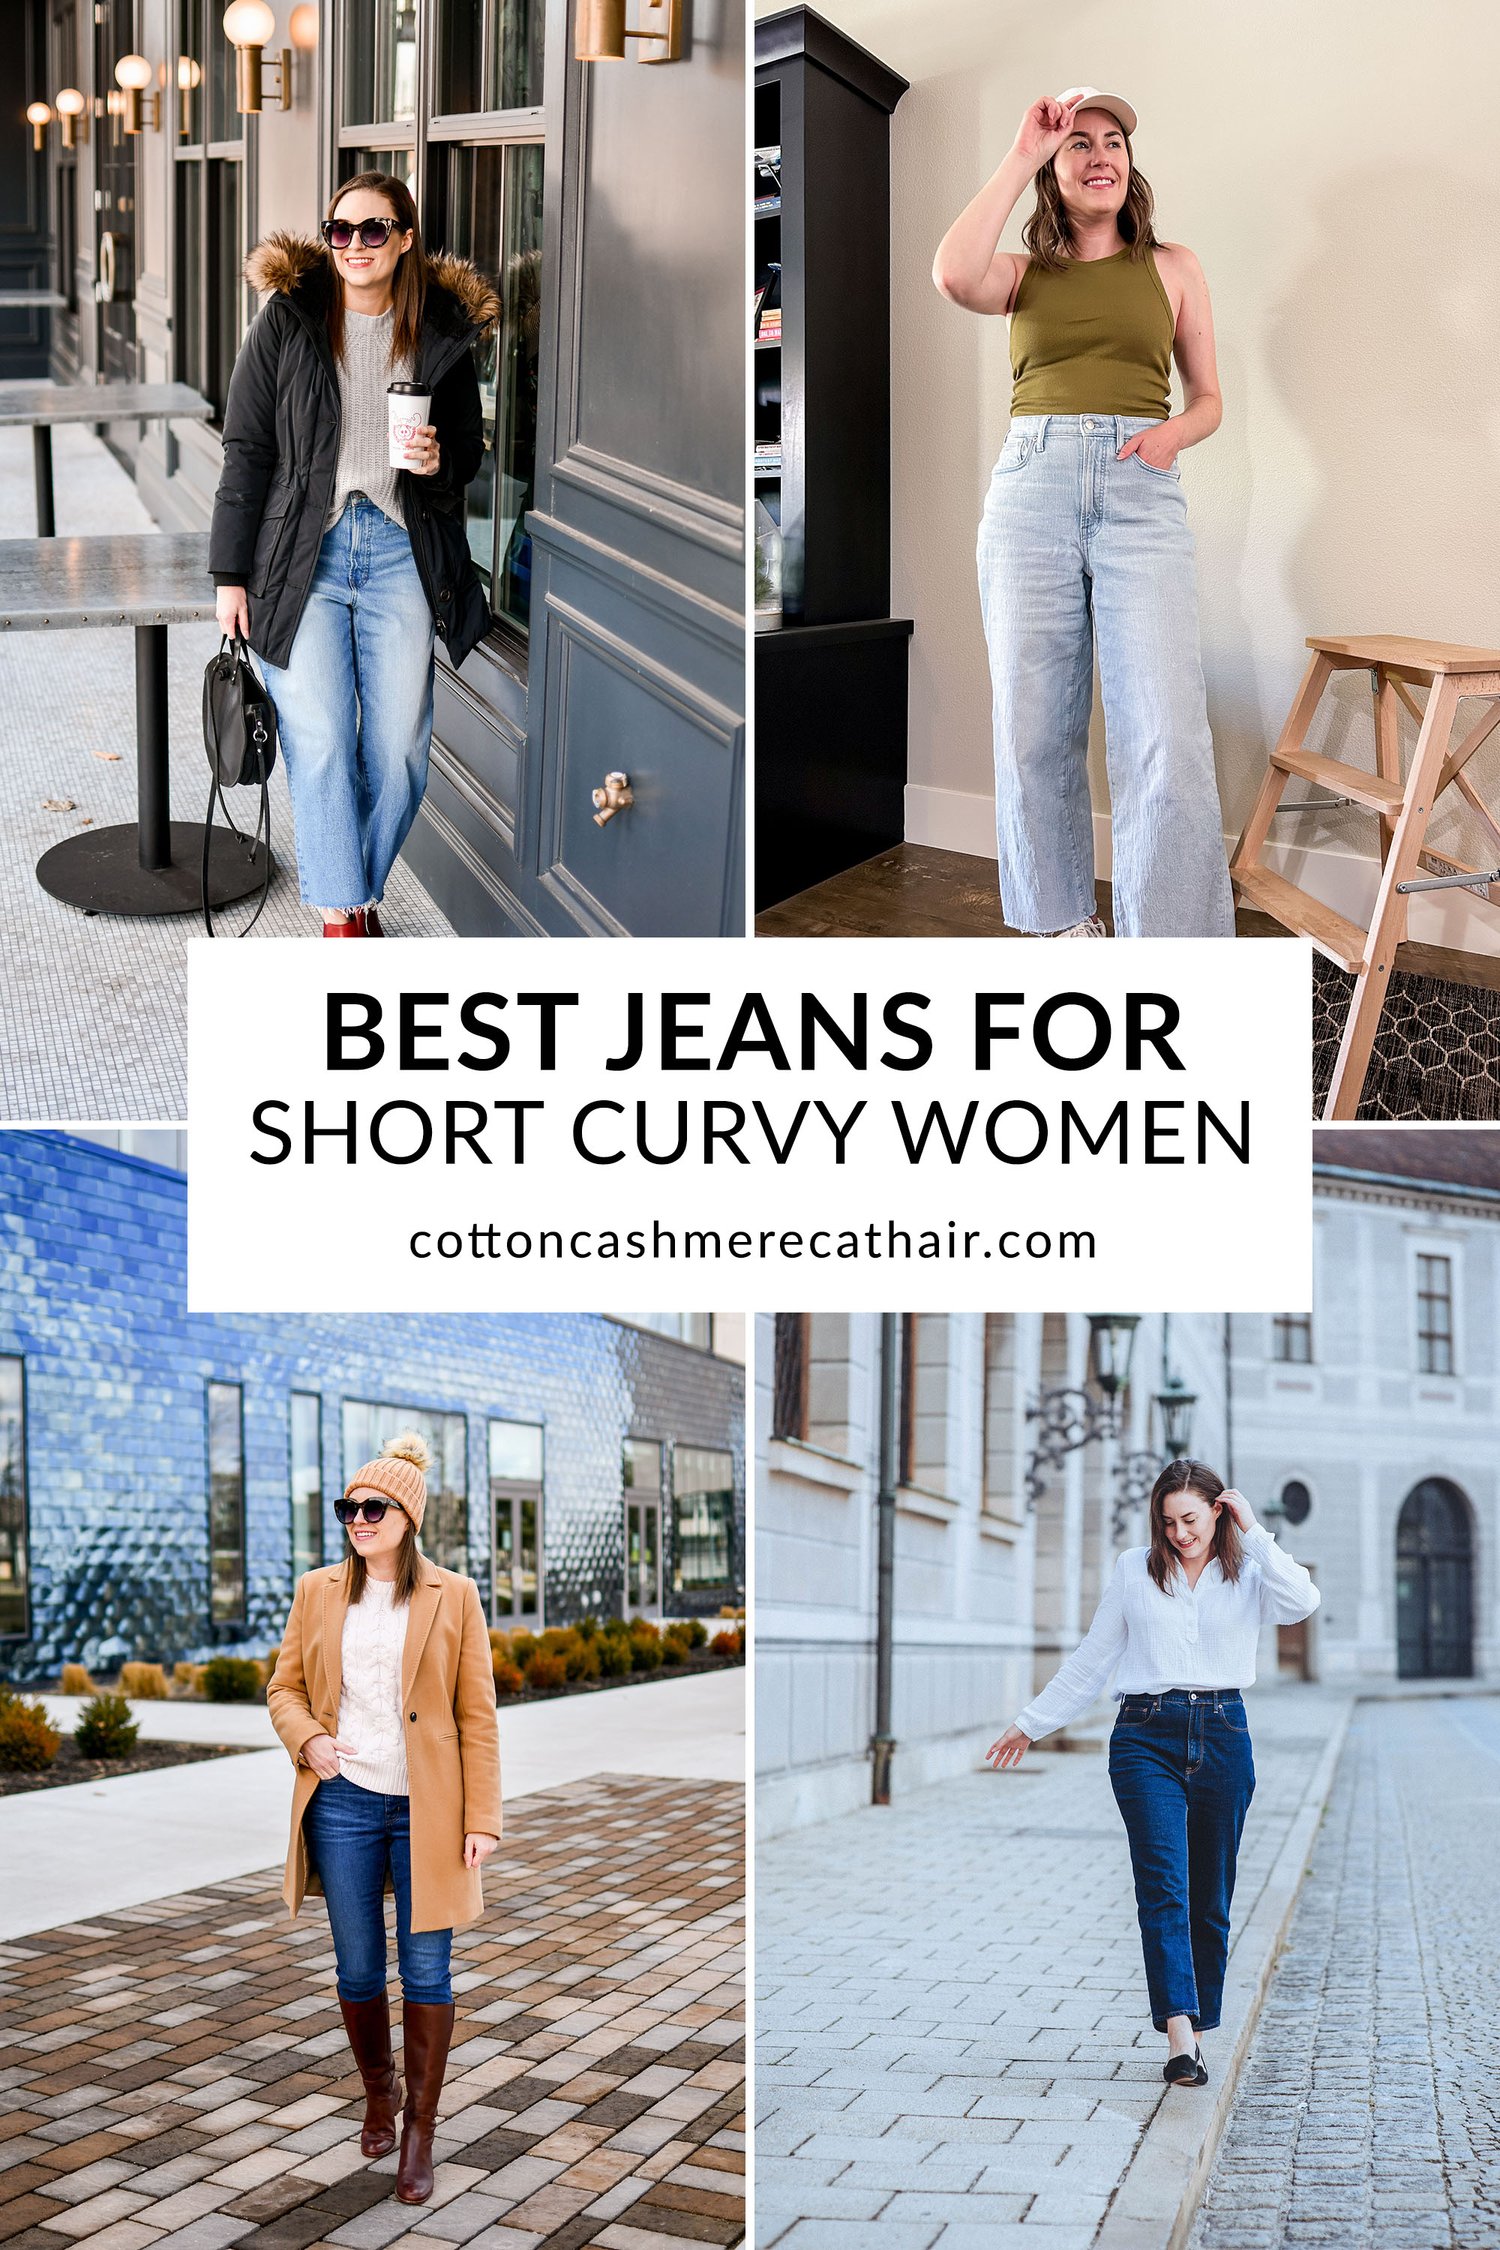 The Jeans Guide for Short and Curvy Women - Petite Dressing